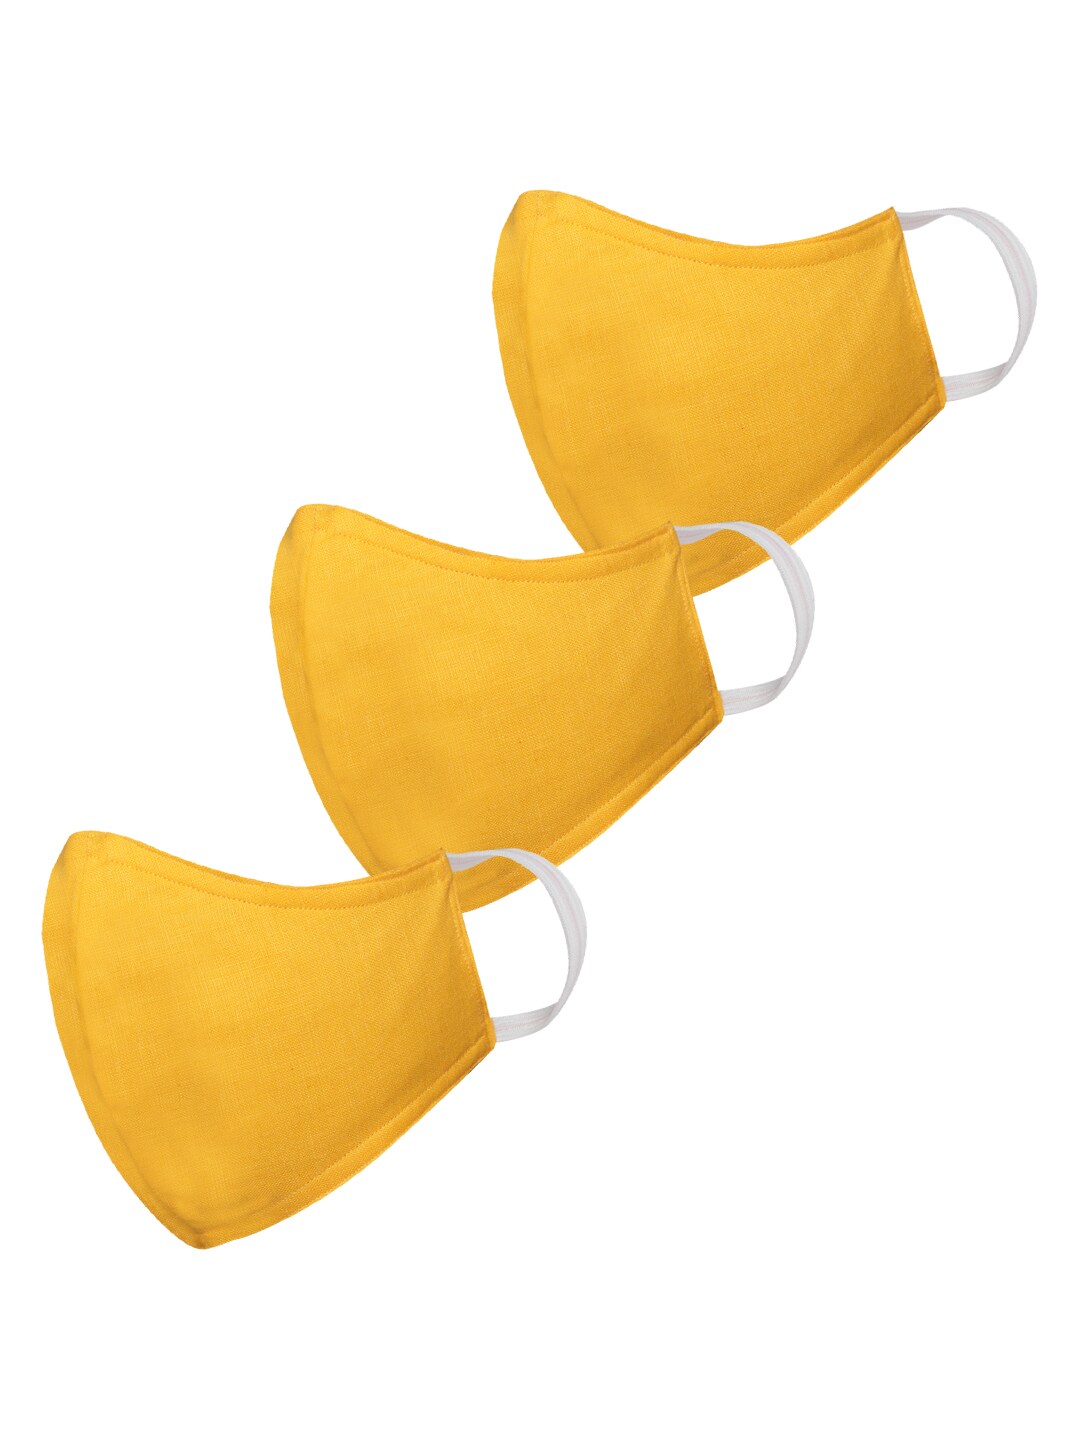 VASTRAMAY Adults Mustard Yellow Solid Pack of 3 Reusable 3-Layer Outdoor Masks Price in India